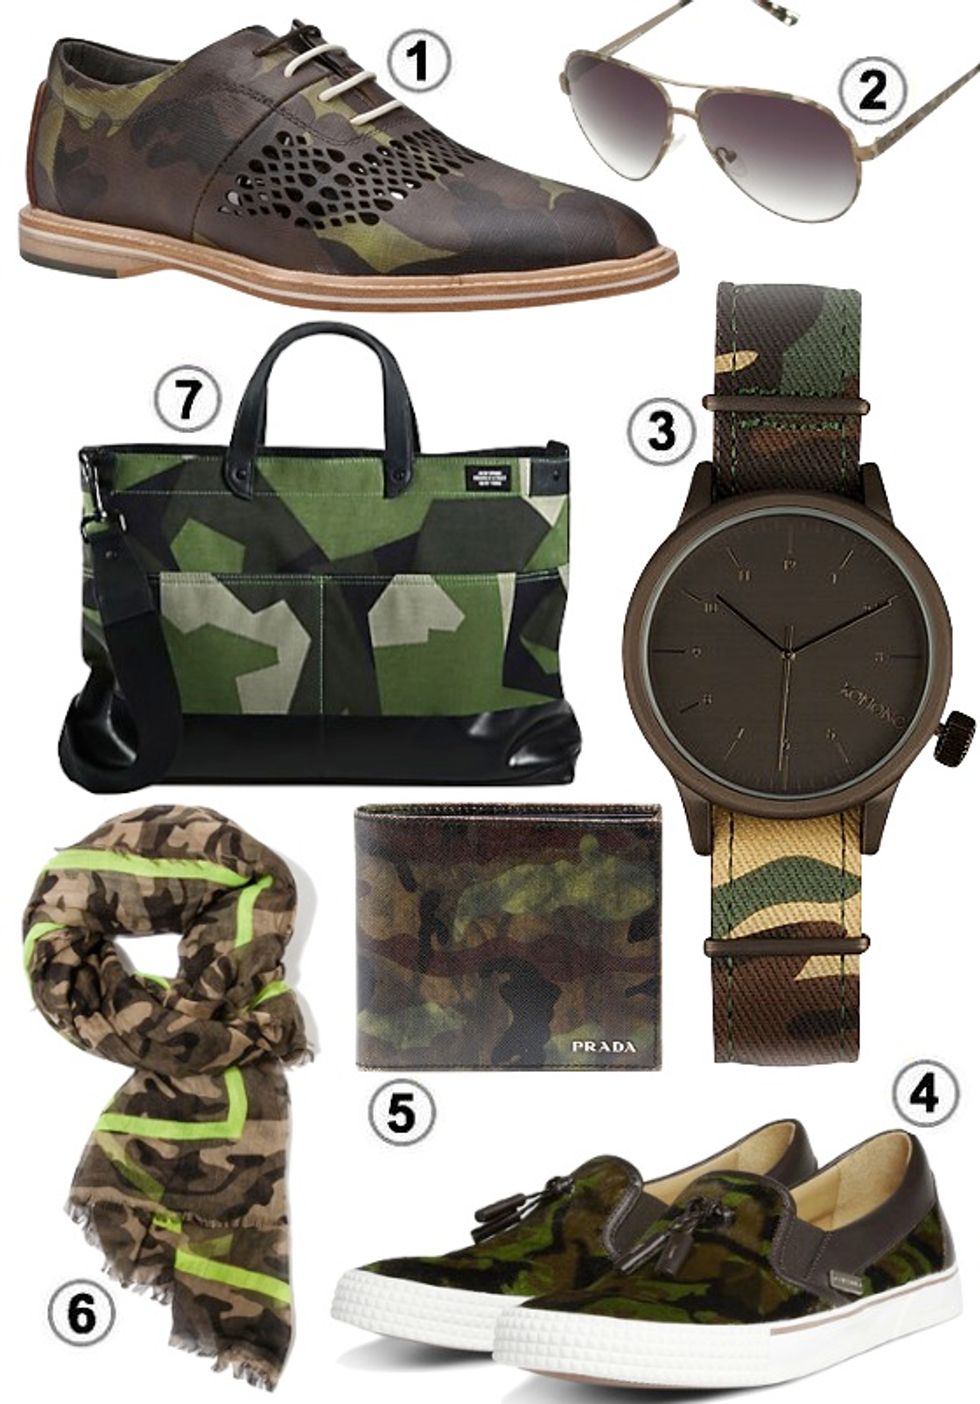 Look of the Week: Creative Camo for Dad